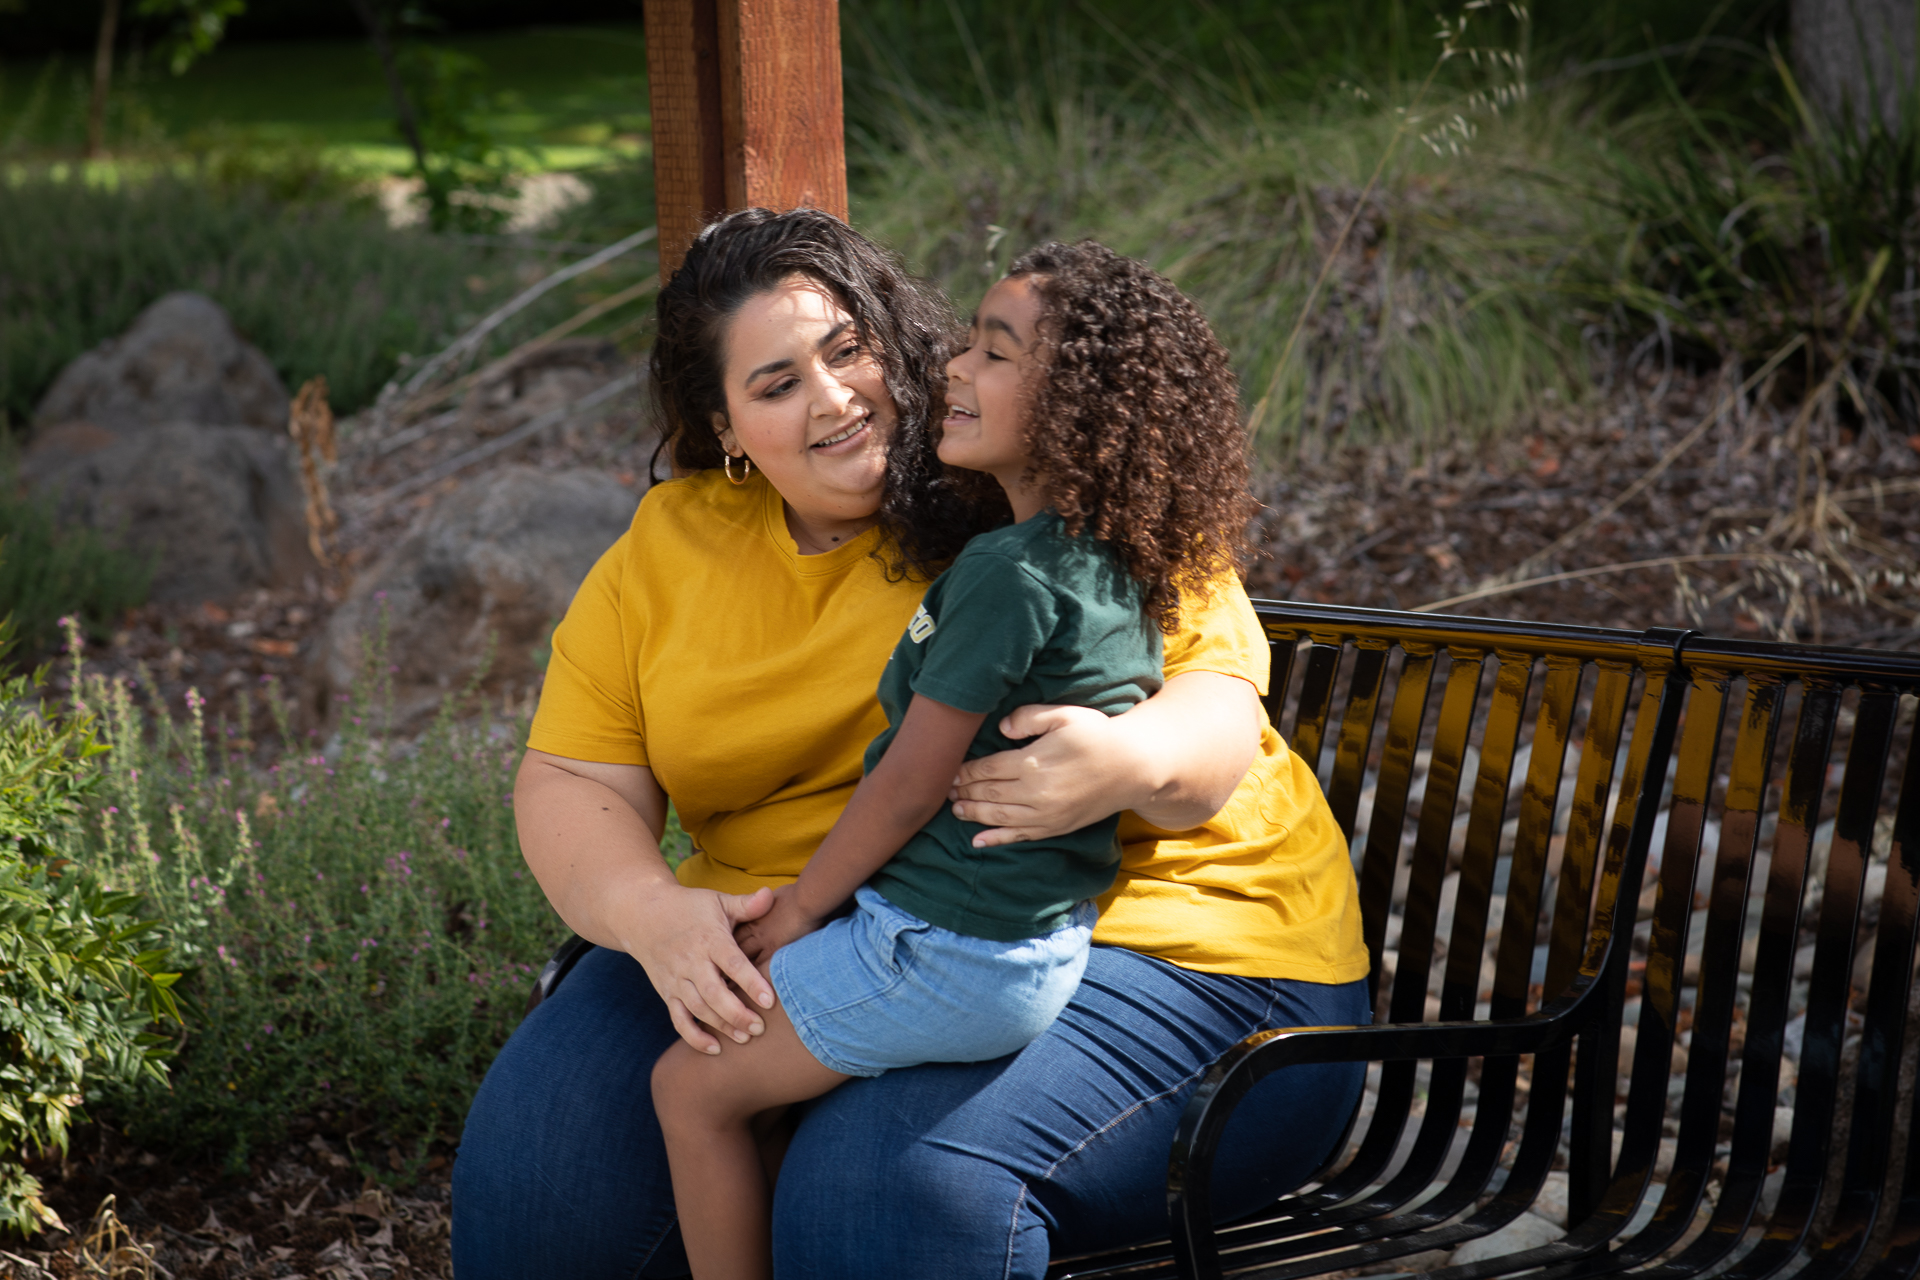 Sharon Rodriguez, outdoors on a bench, with her daughter sitting on her lap.